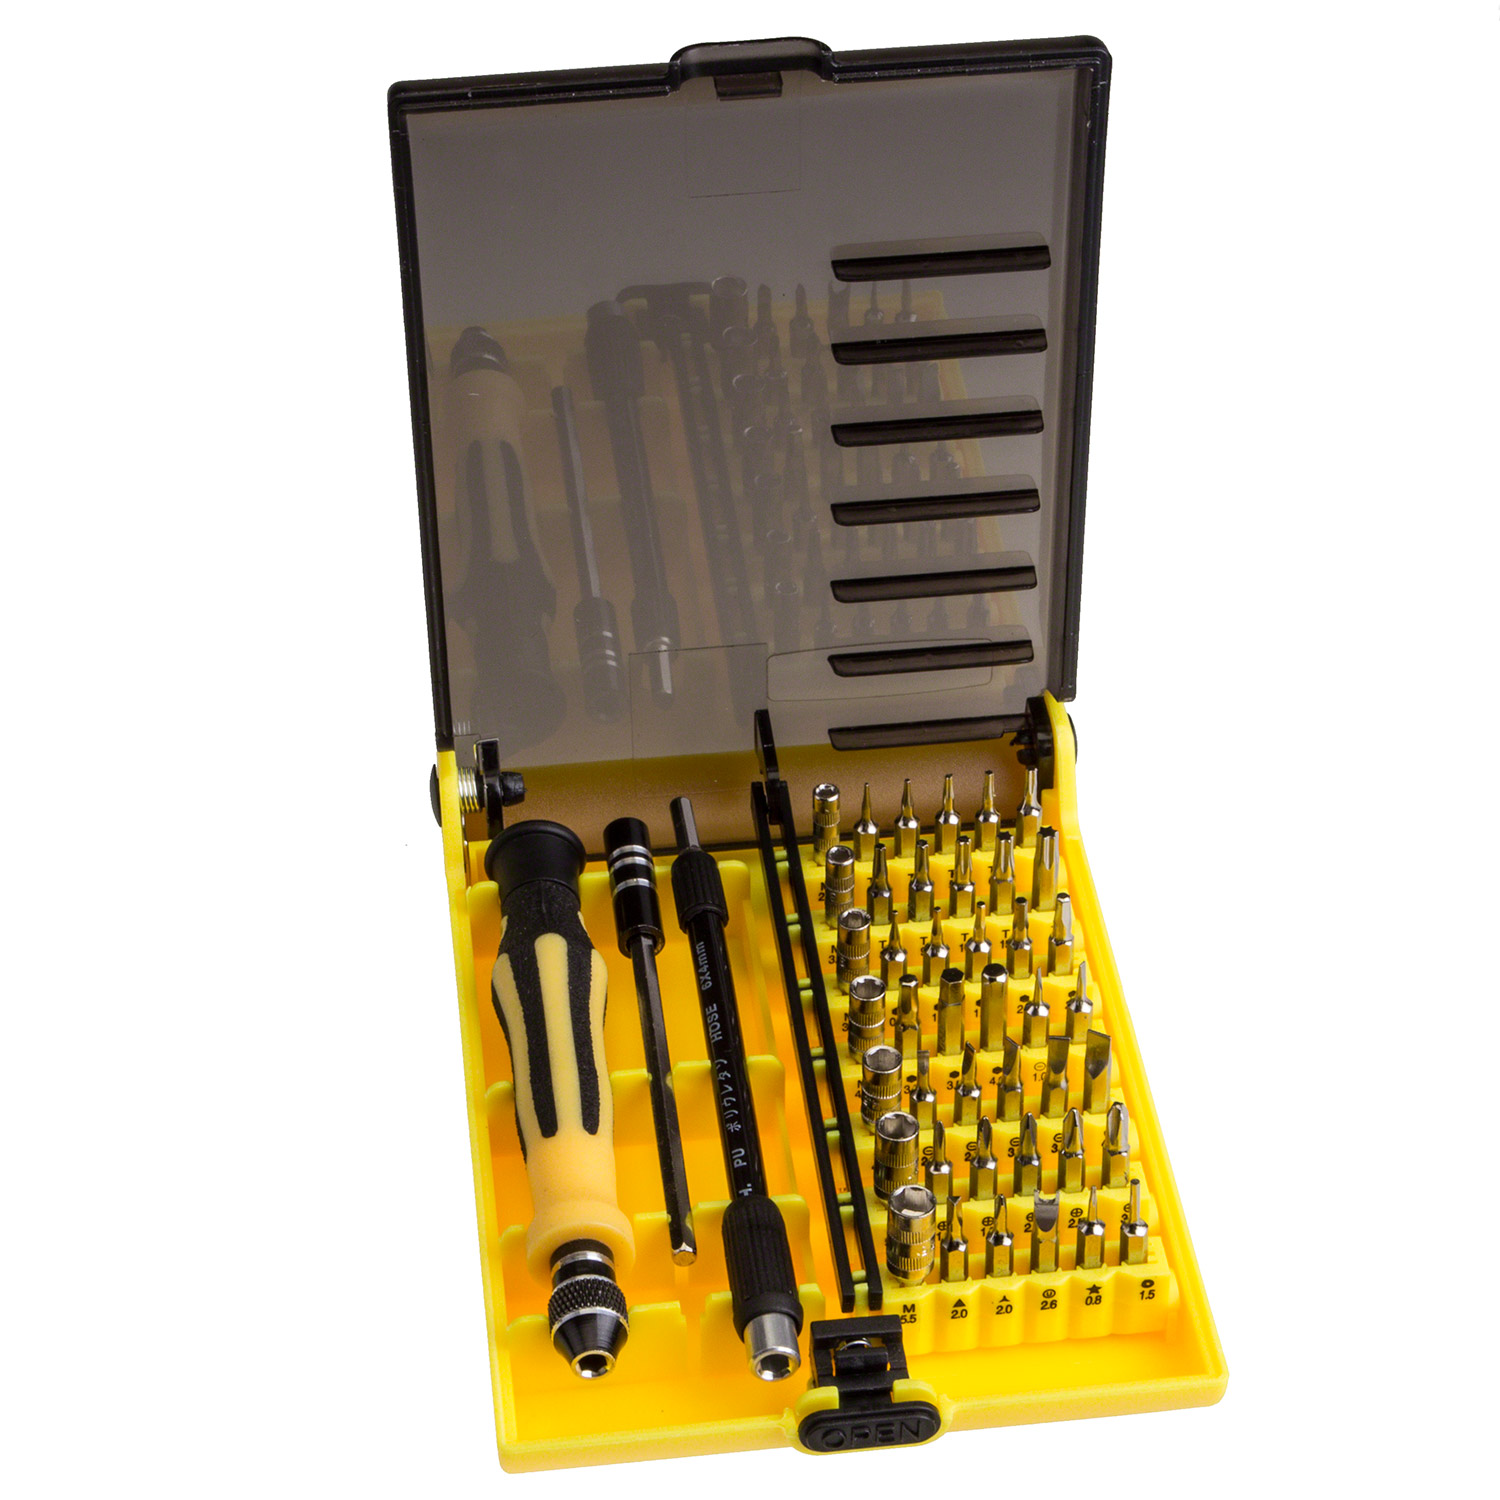 Precision Screwdriver Tool Kit Set with Tweezers and Extension Rod - 45 Piece